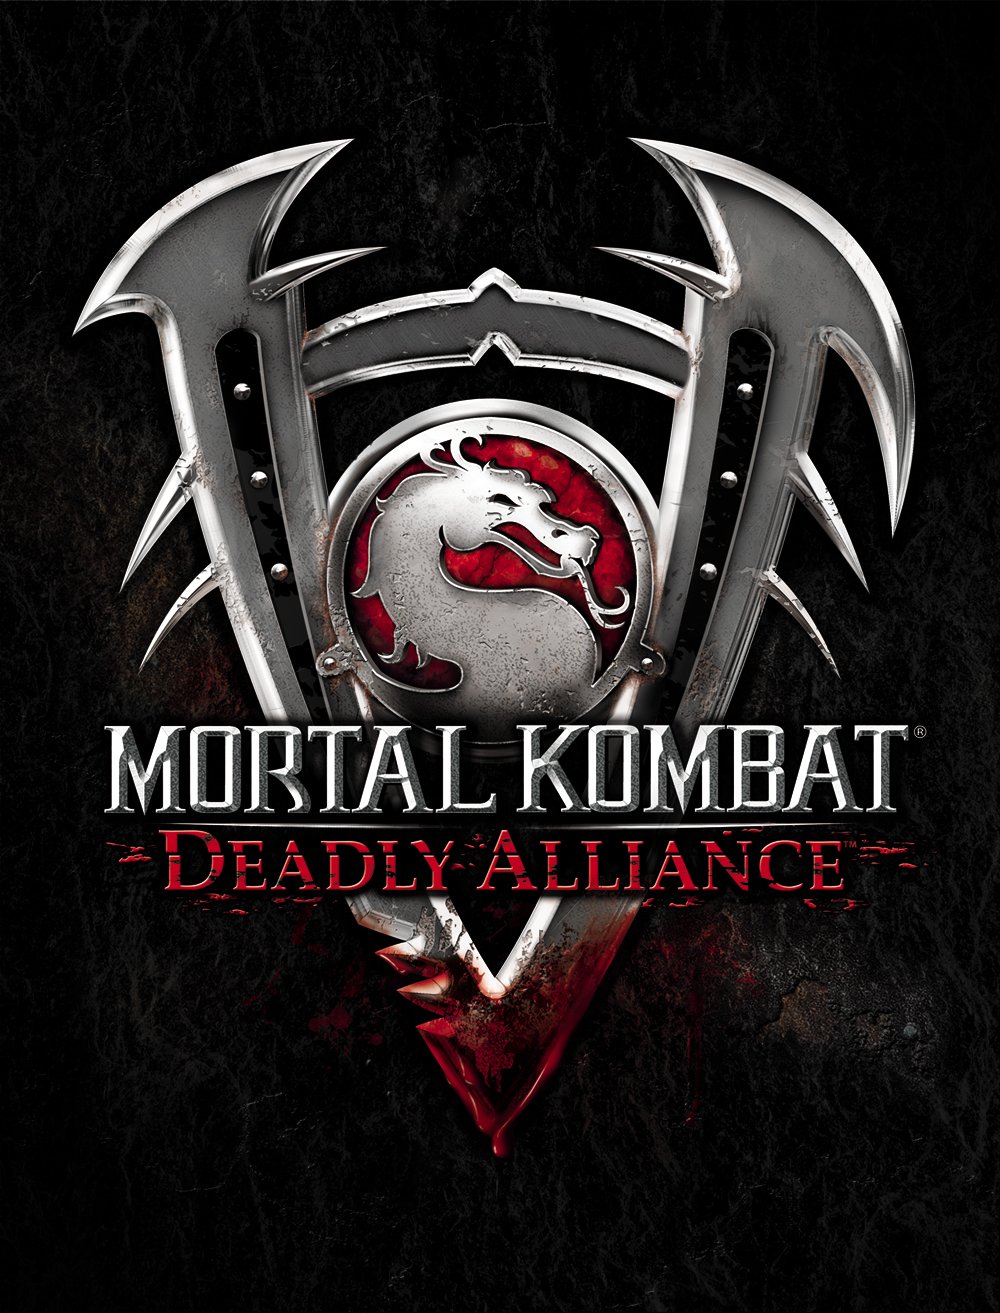 Mortal Kombat X Review - A Deadly Alliance Of Old And New - Game